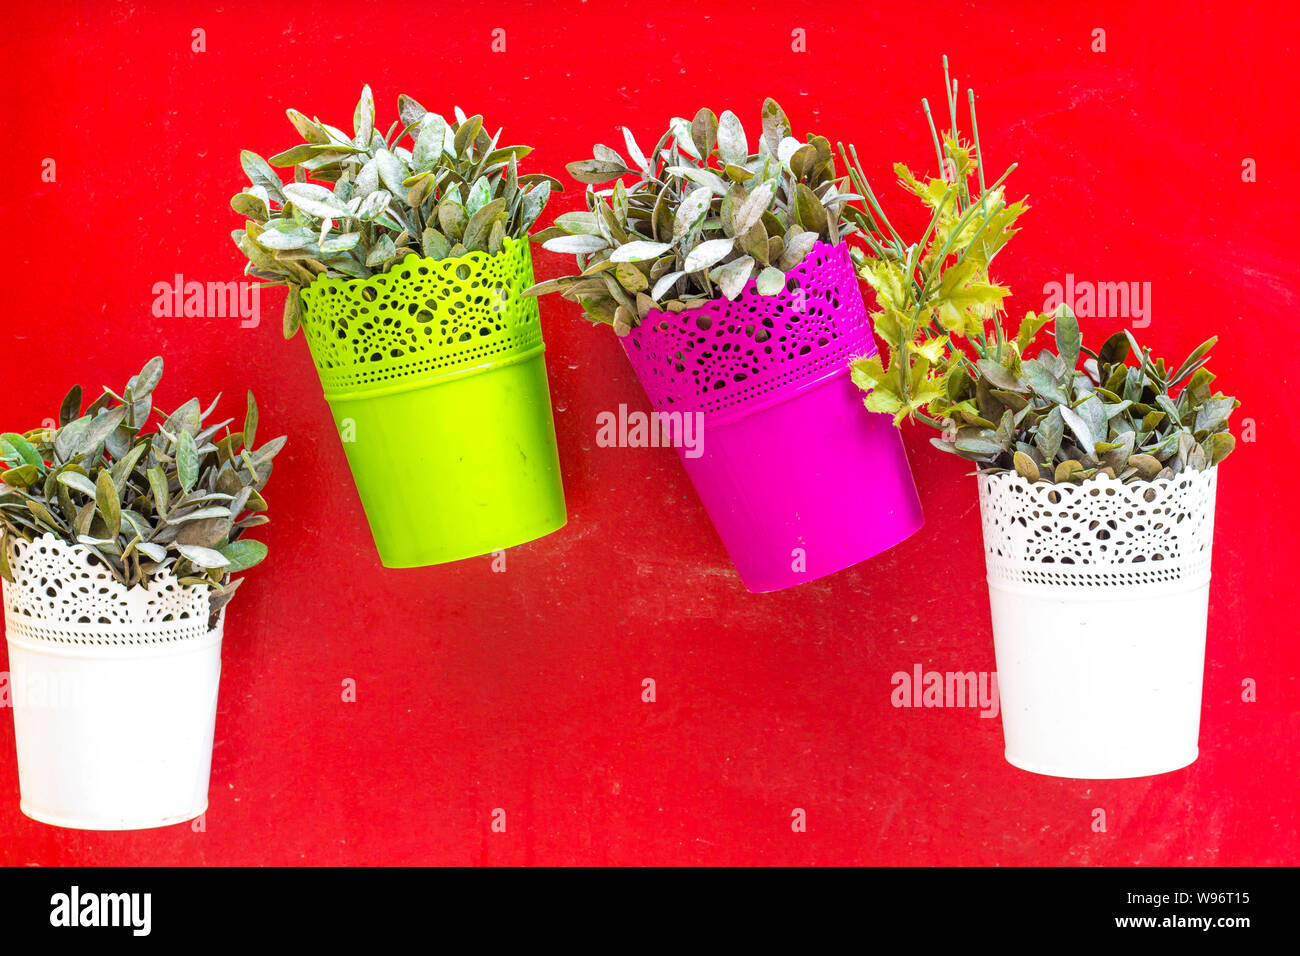 Flowers in flower pots on a red background. Flower pots are made of iron and painted in red, green and white. Not a large garden in the interior of th Stock Photo